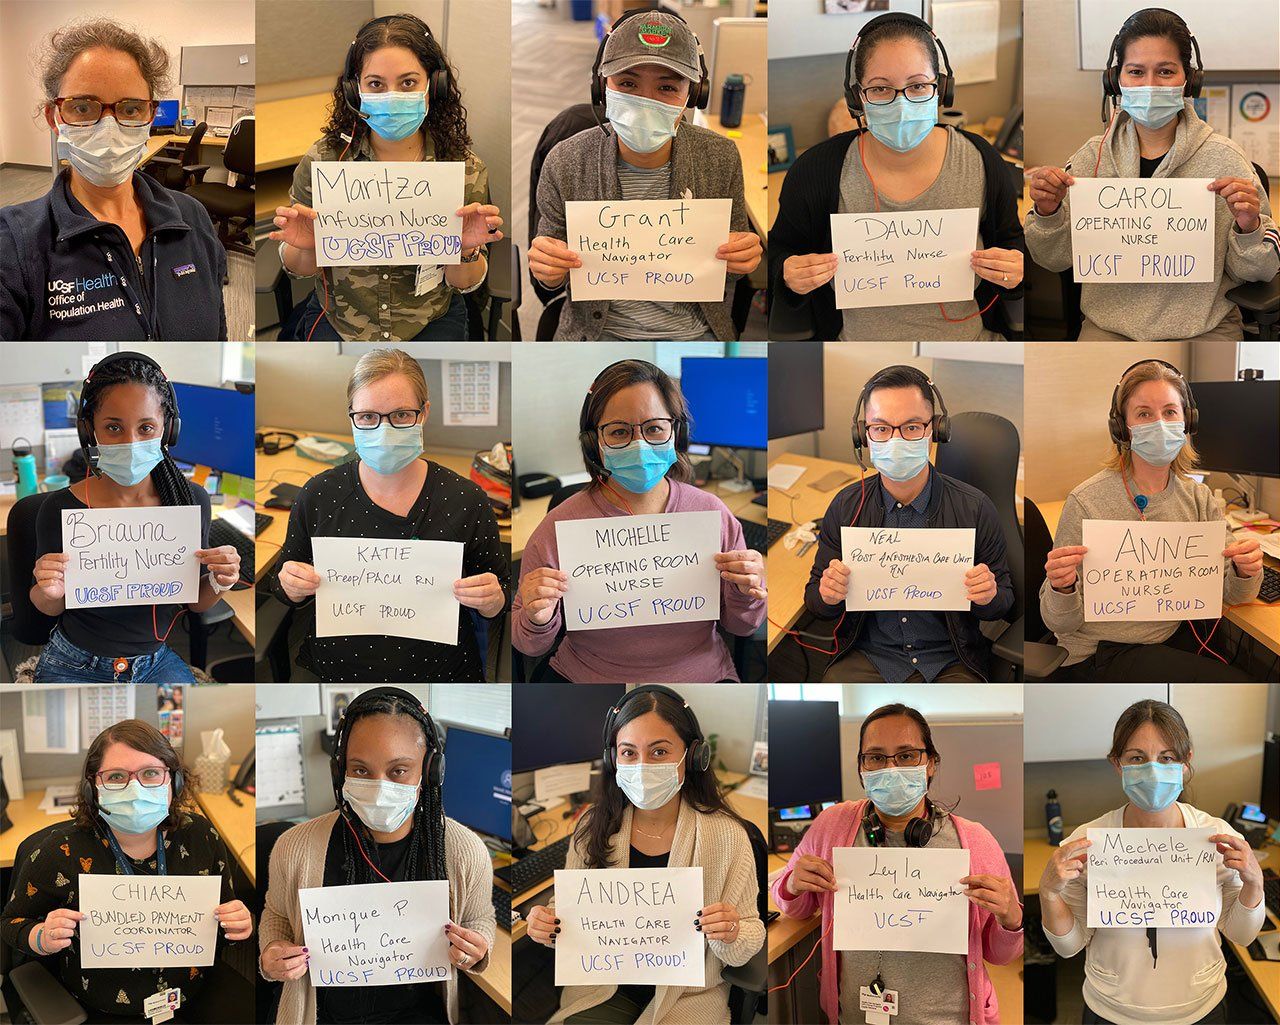 Collage of photos of UCSF COVID hotline team members, holding signs with messages of support.